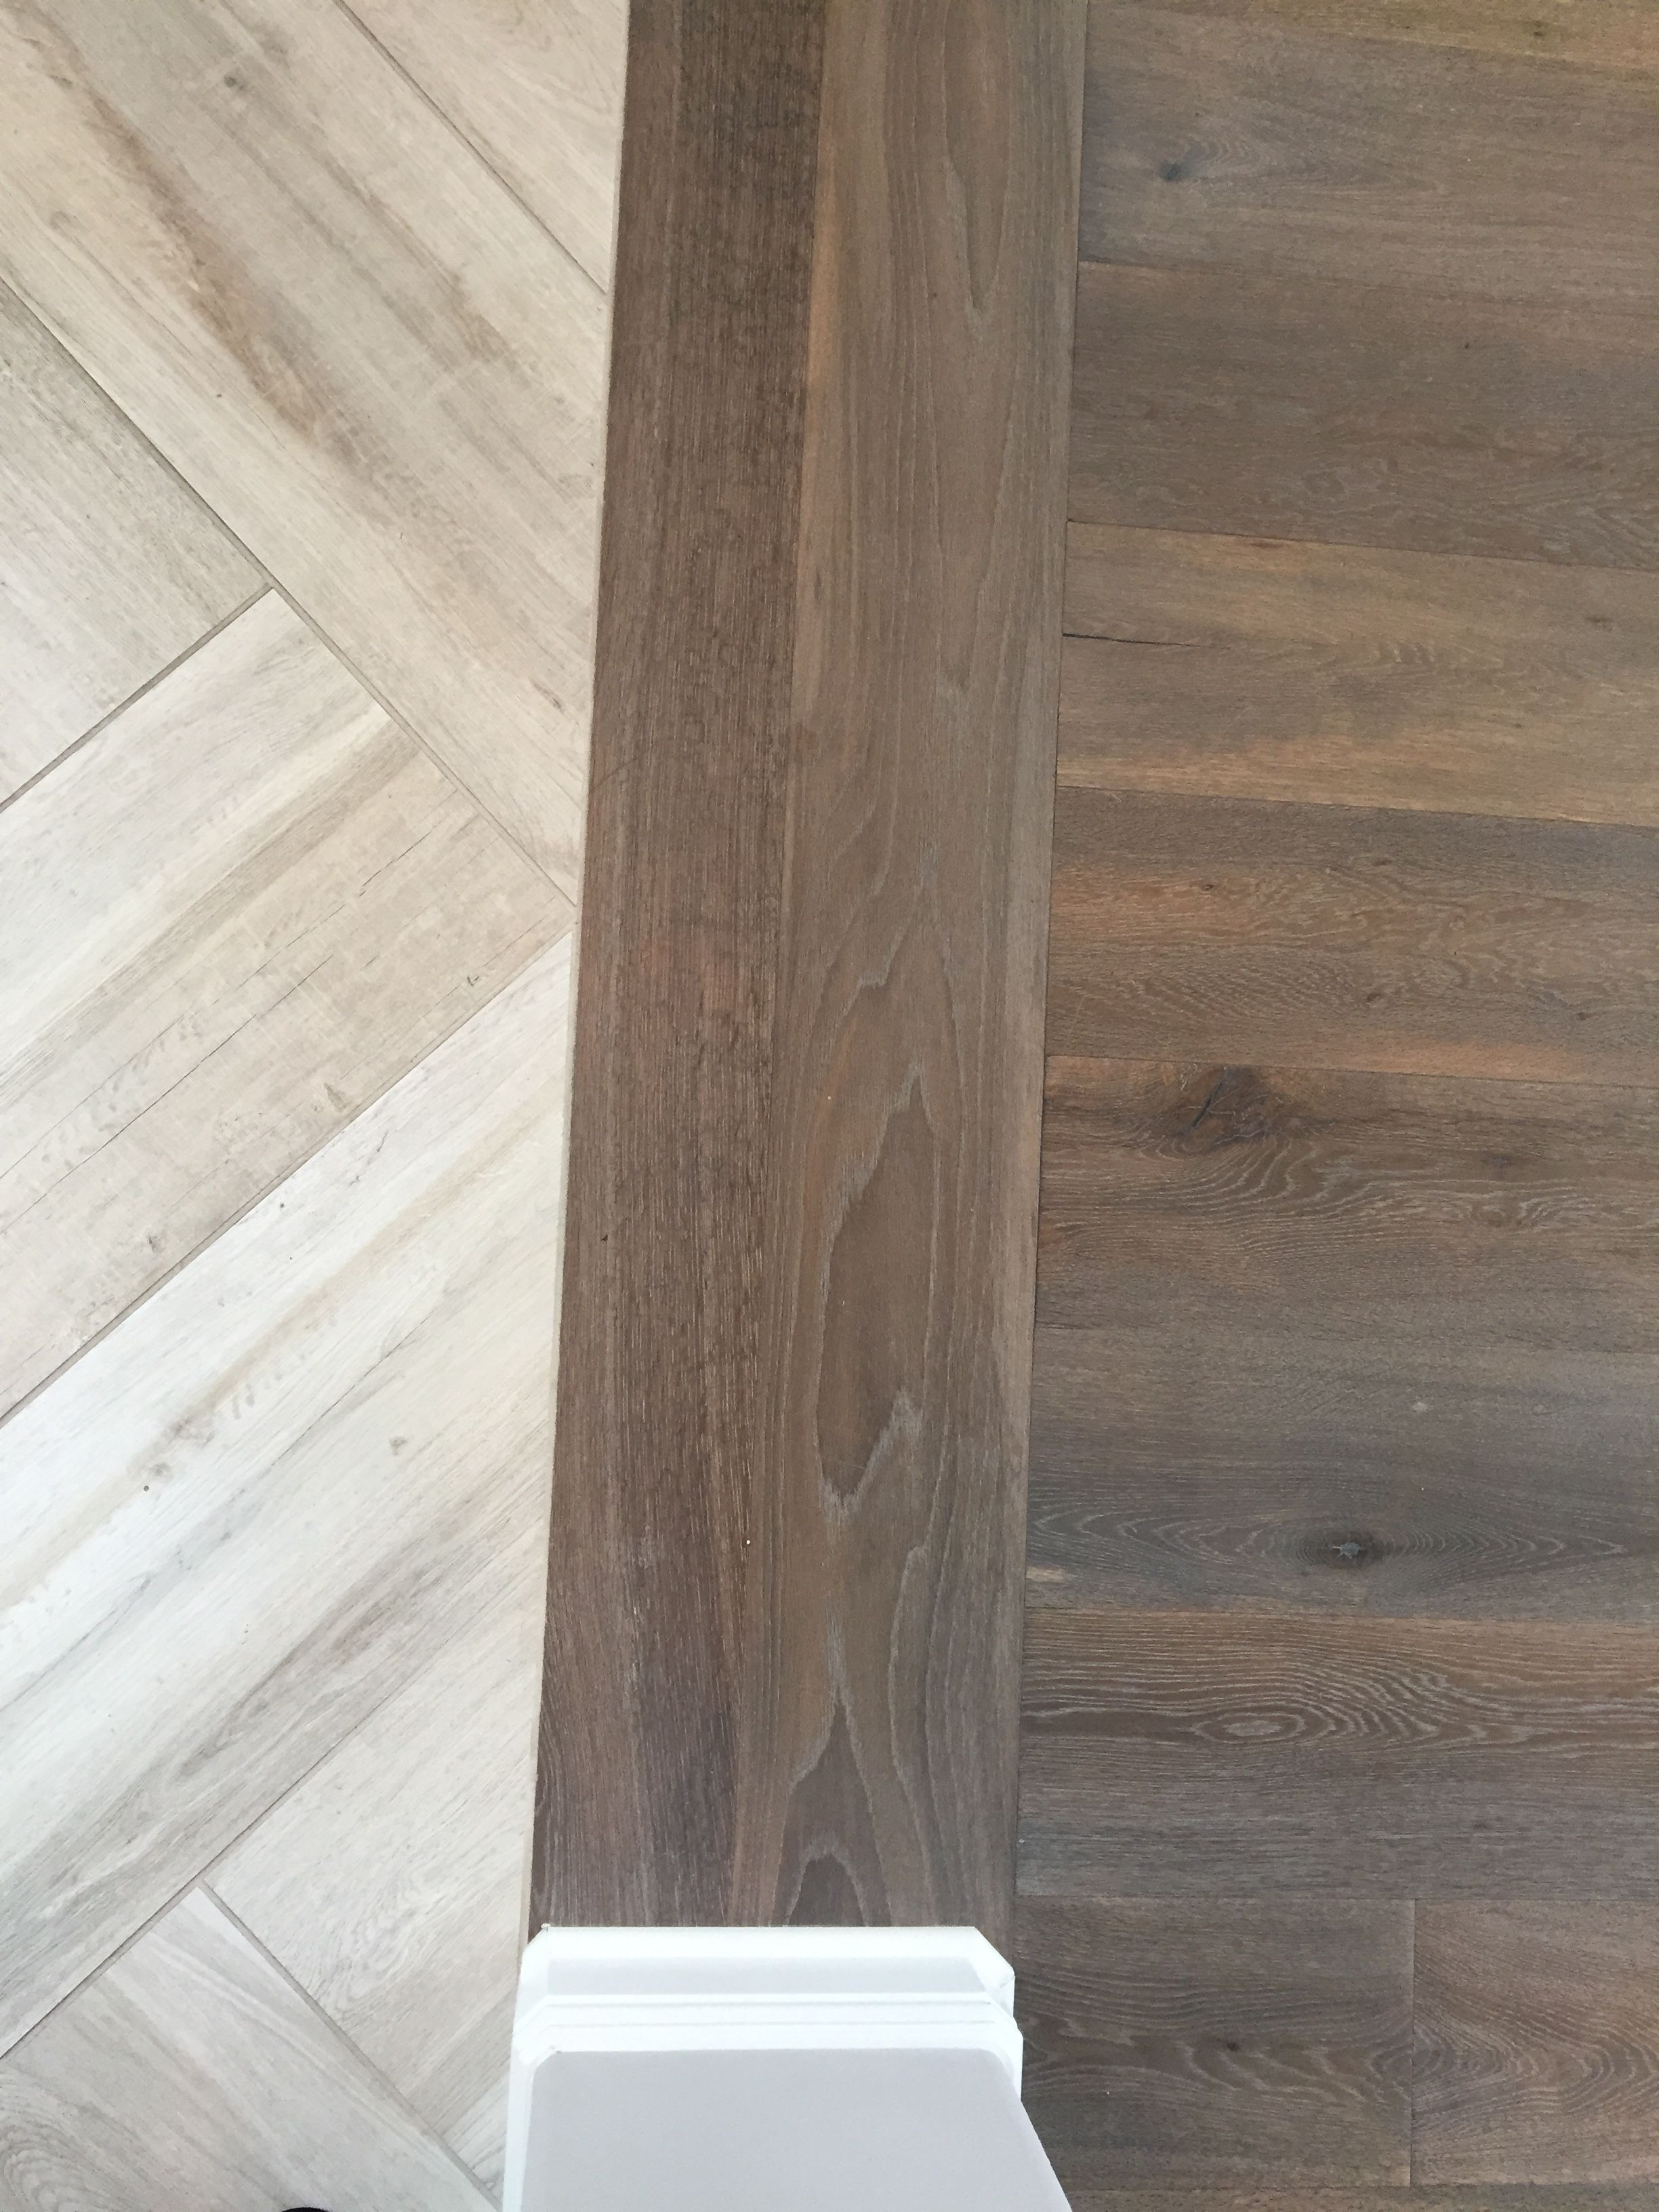 Wood for Fireplace Fresh 26 Re Mended Hardwood Floor Fireplace Transition